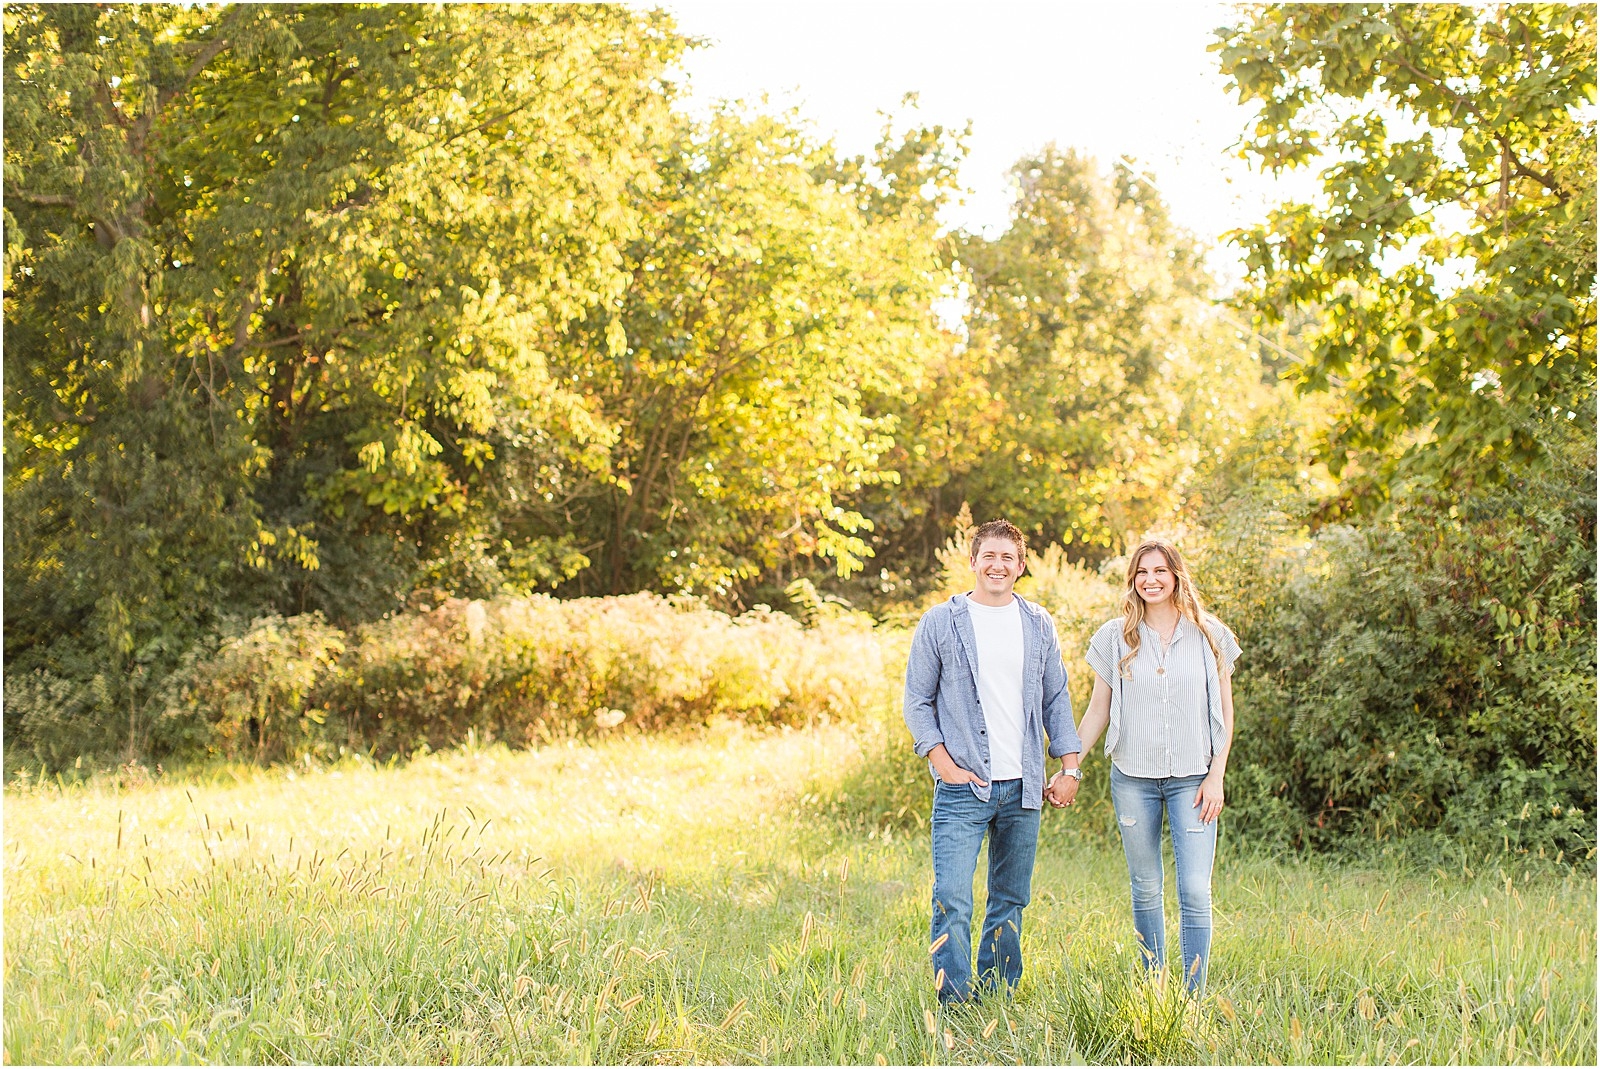 A Jasper Indiana Engagement Session | Tori and Kyle | Bret and Brandie Photography003.jpg